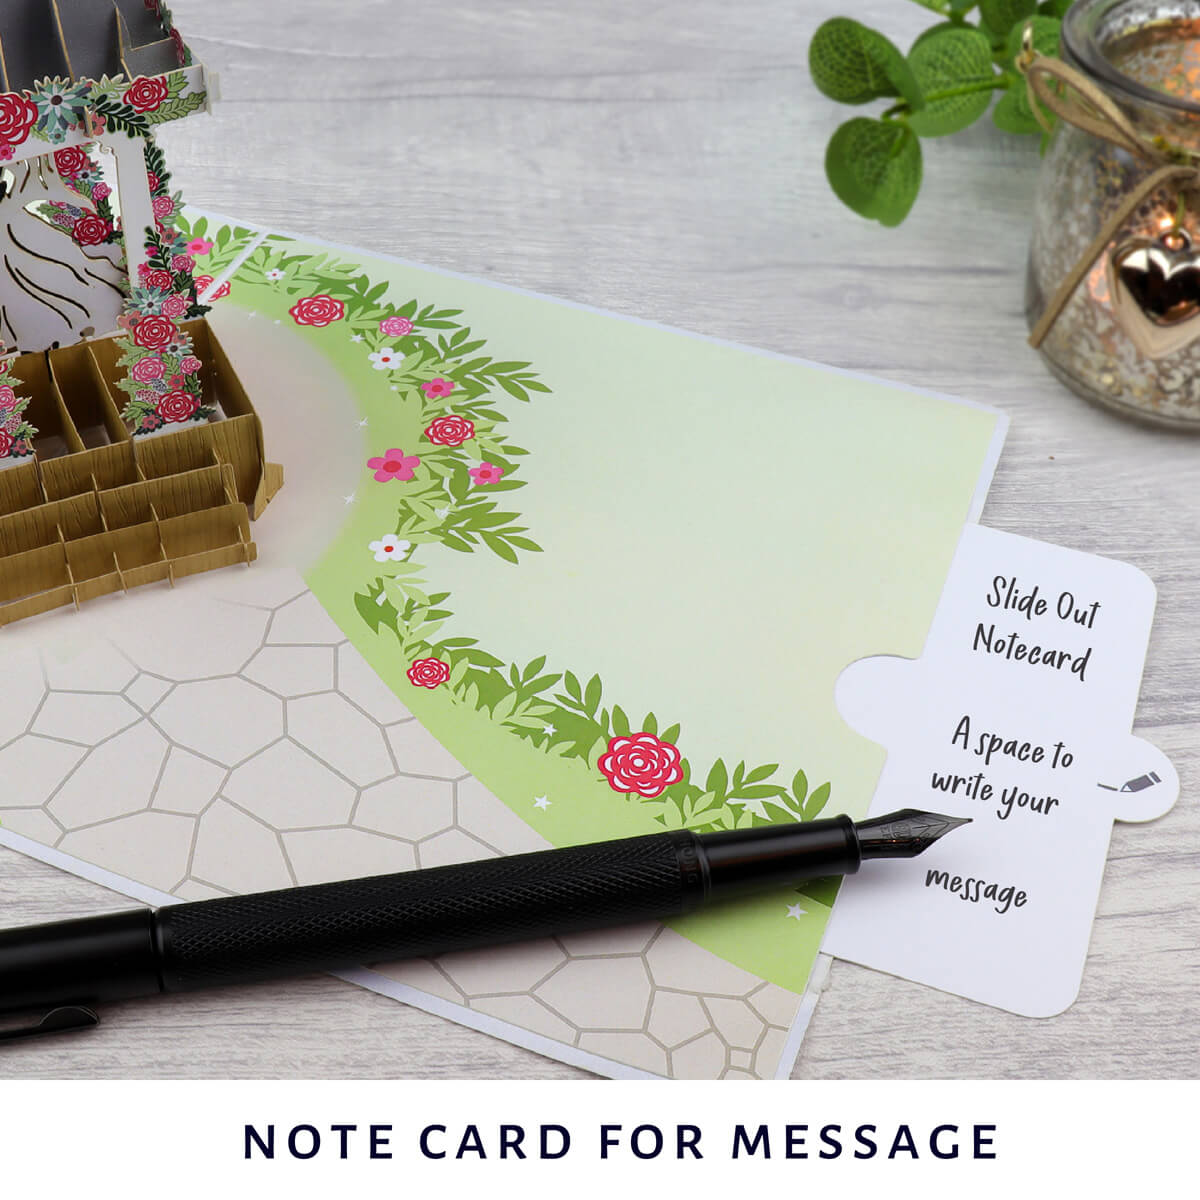 Wedding Pagoda Pop Up Card - image of slide out notecard which gives a space to write your message on